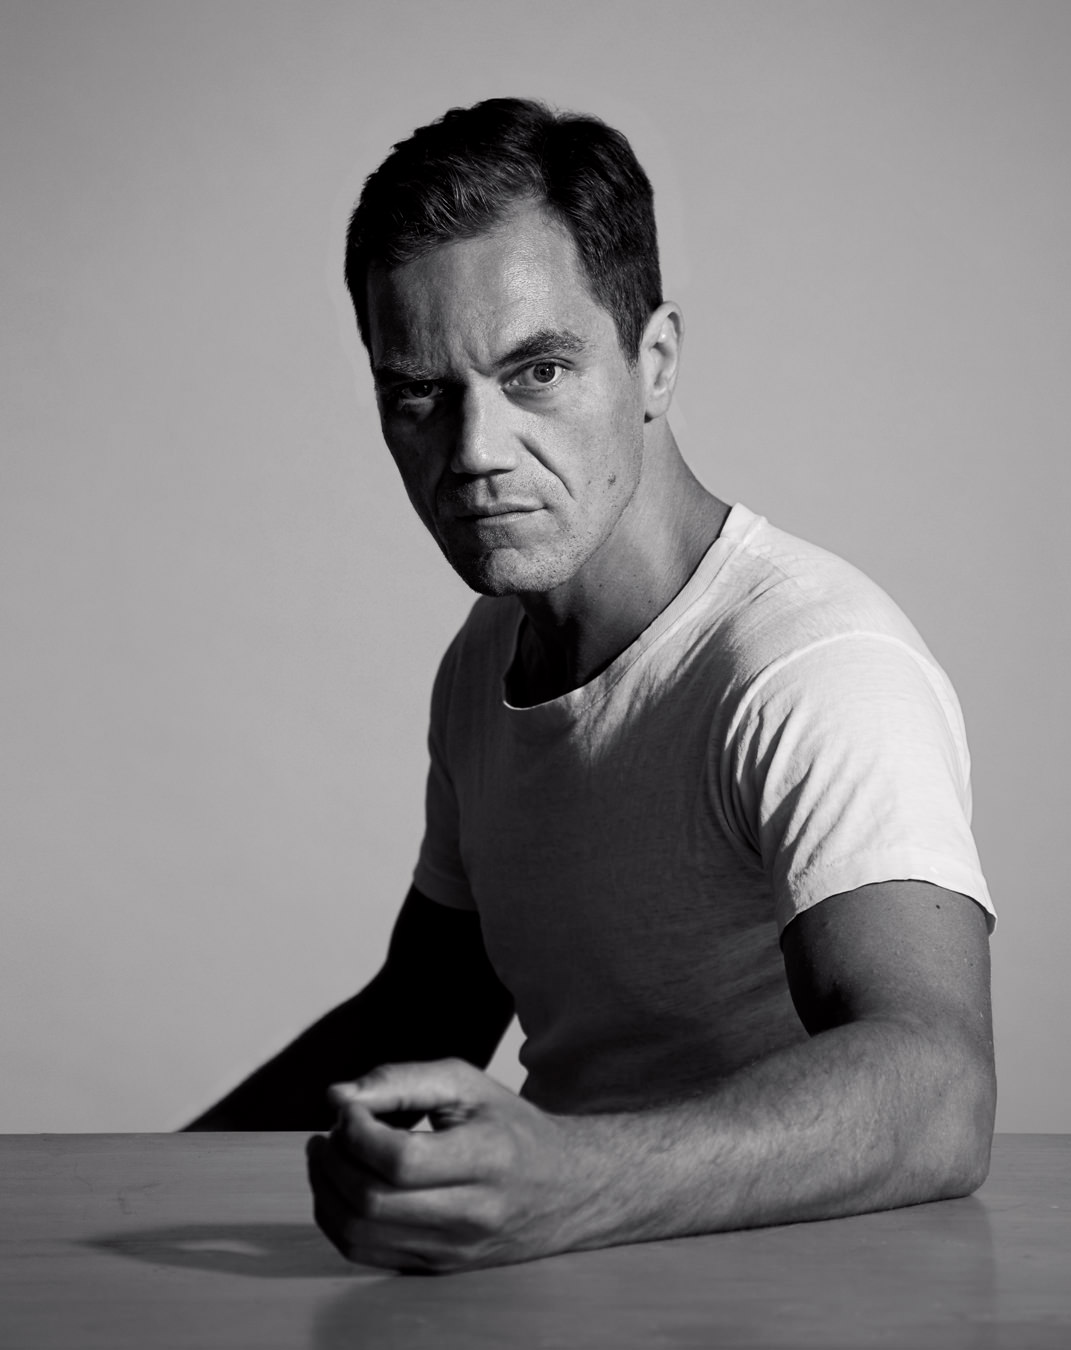 NUVO Winter 2015: Michael Shannon, Chronicle